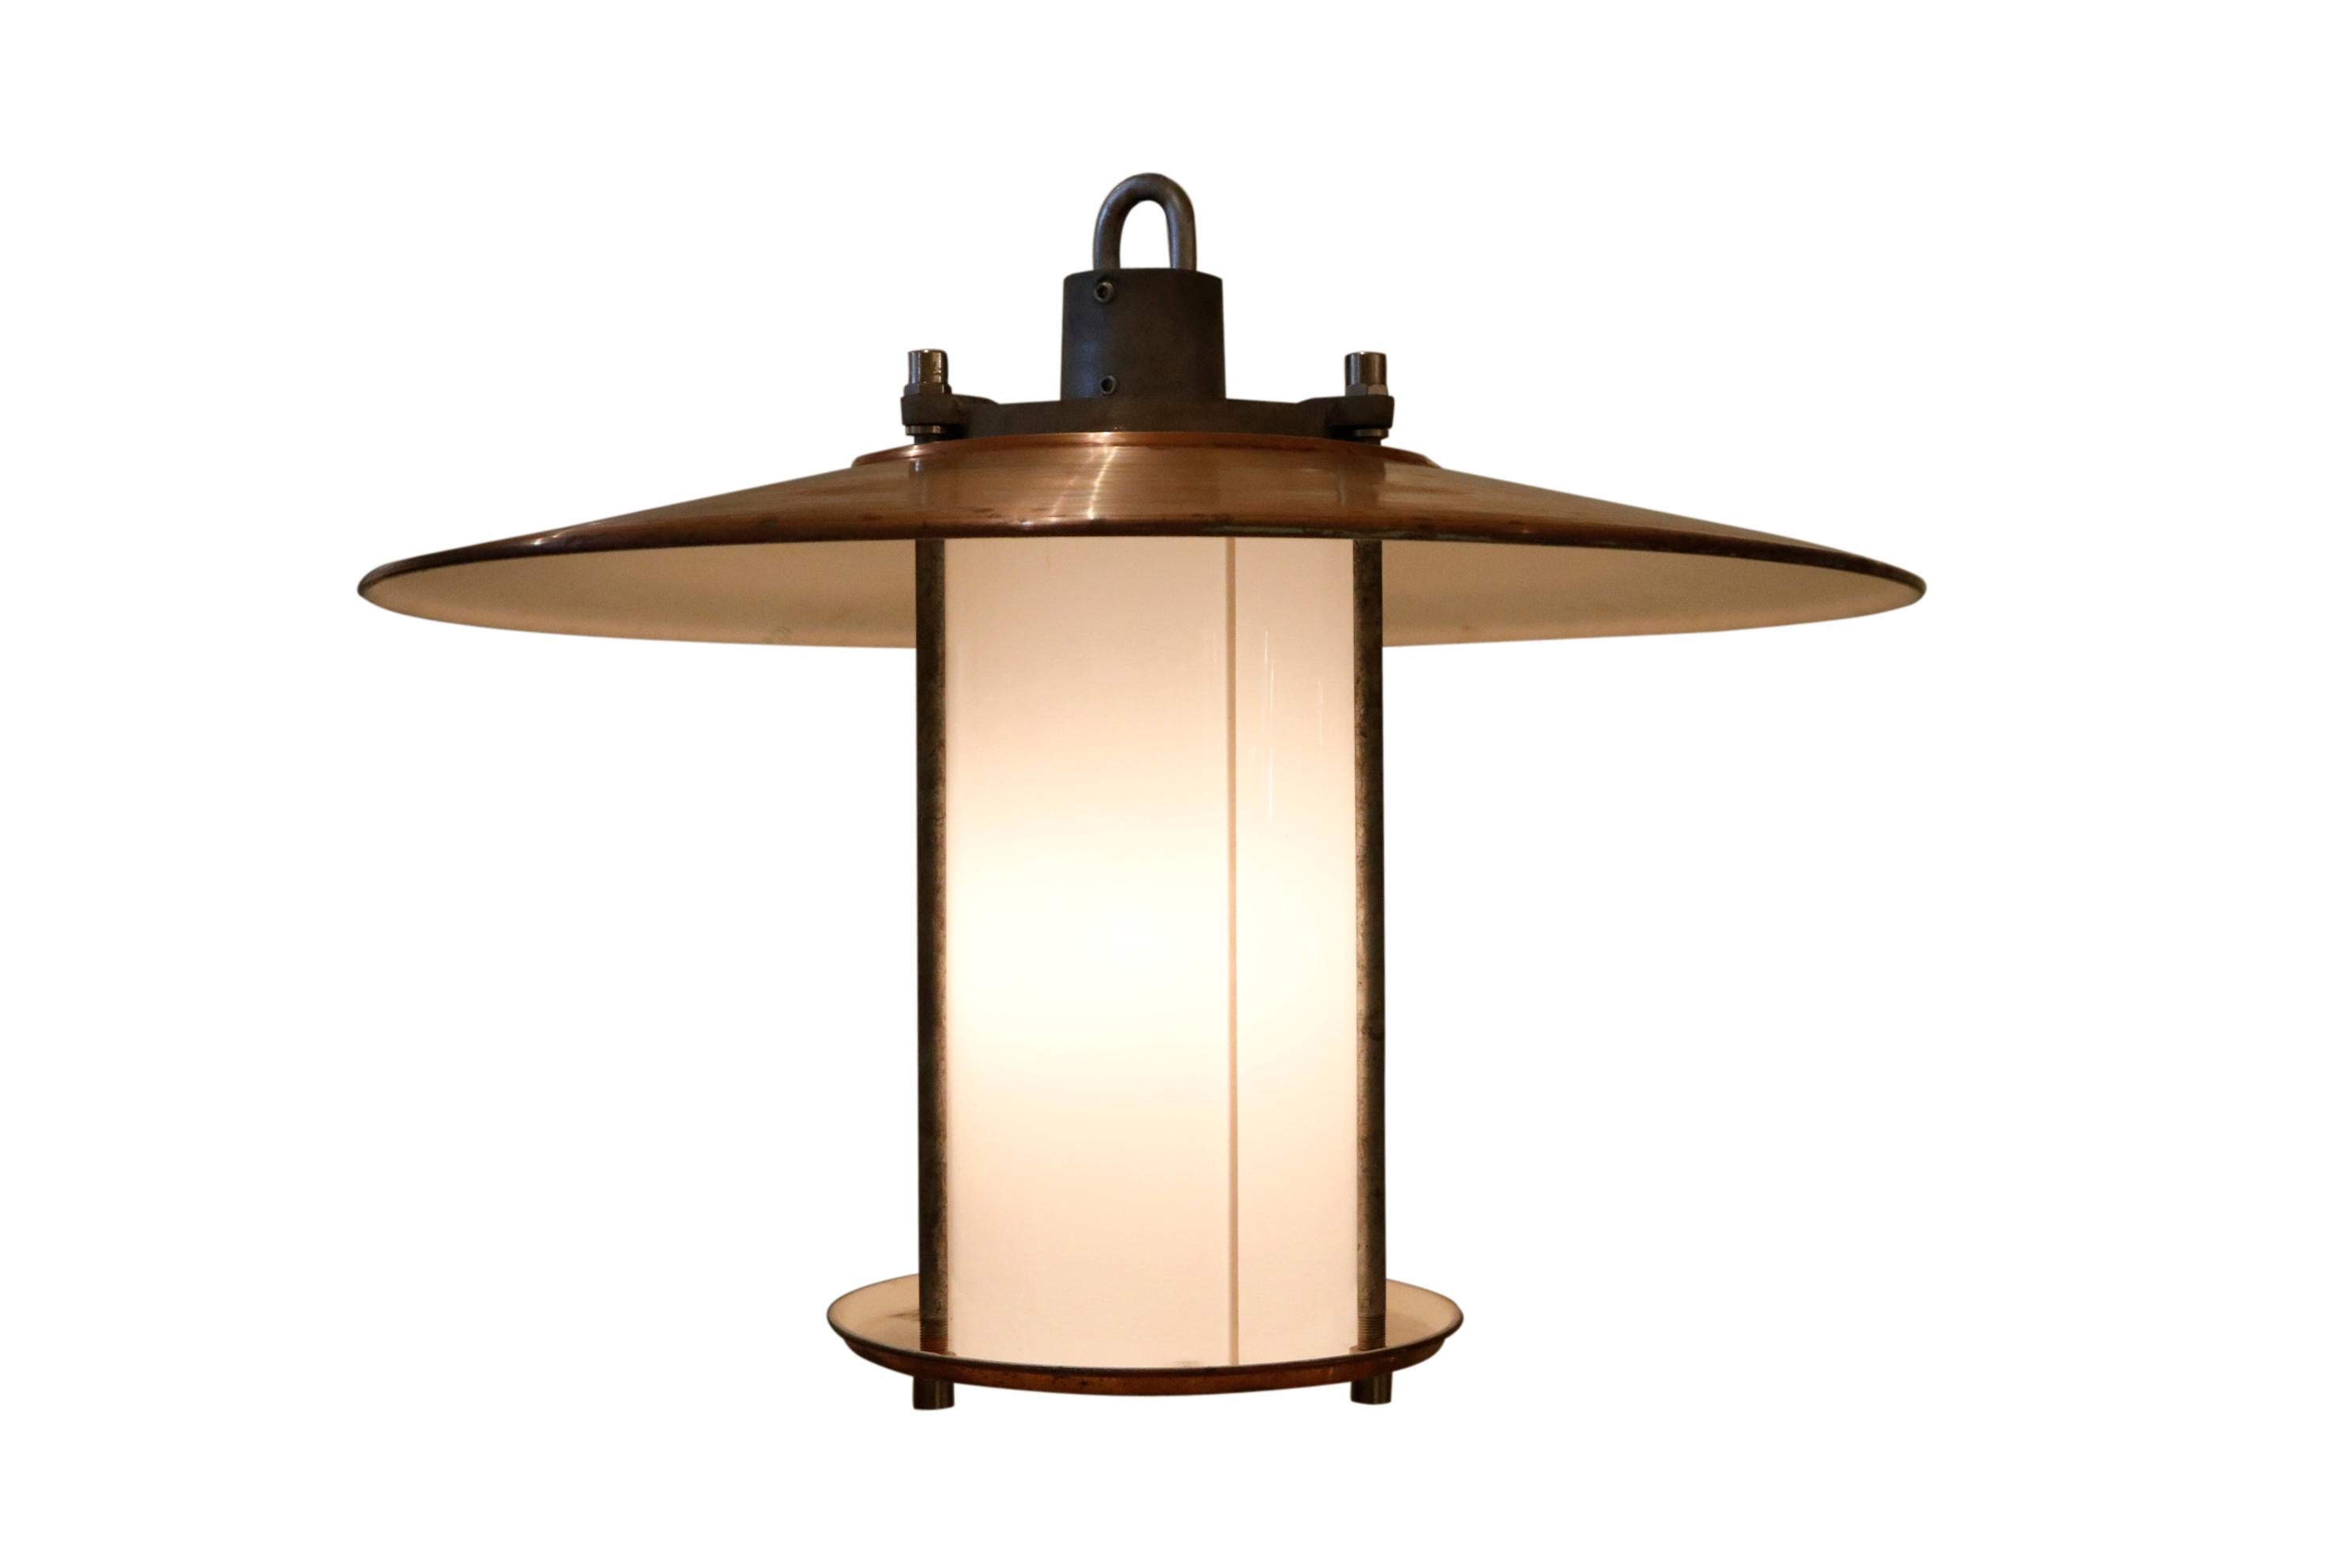 This large copper top fixture illuminates with directed down light and with ambient light, circa 1980.